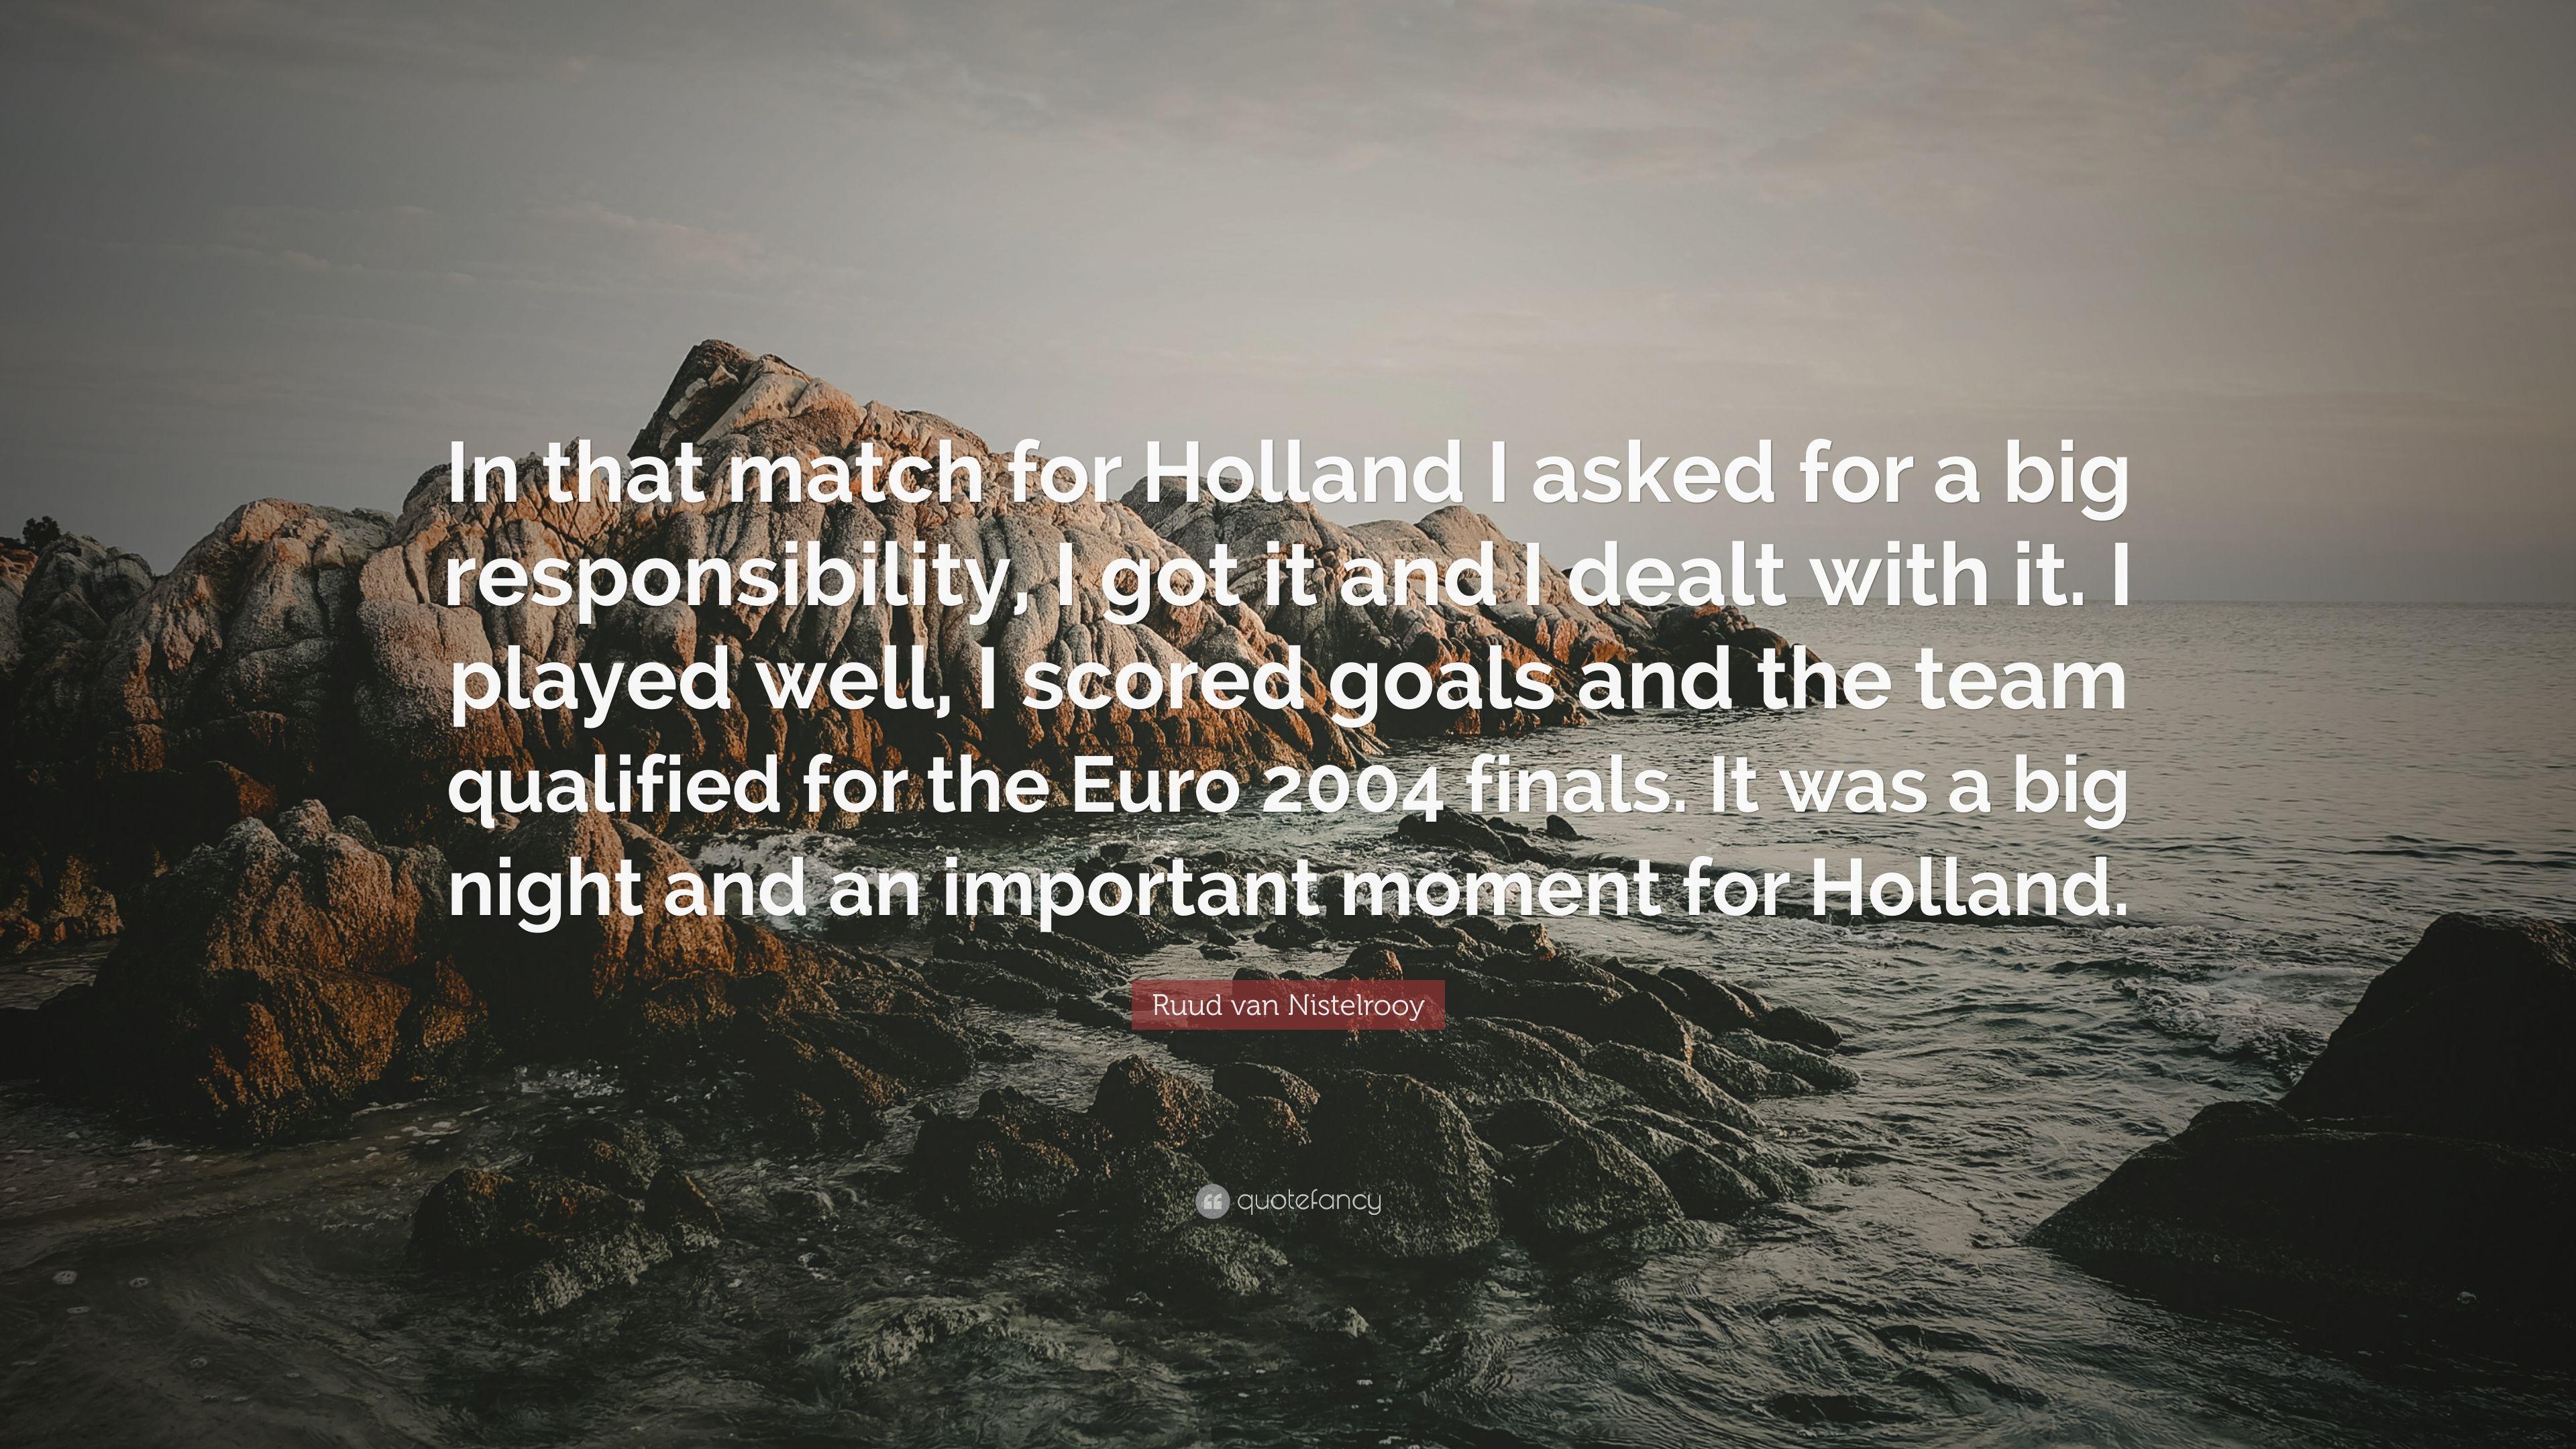 Ruud van Nistelrooy Quote: “In that match for Holland I asked for a